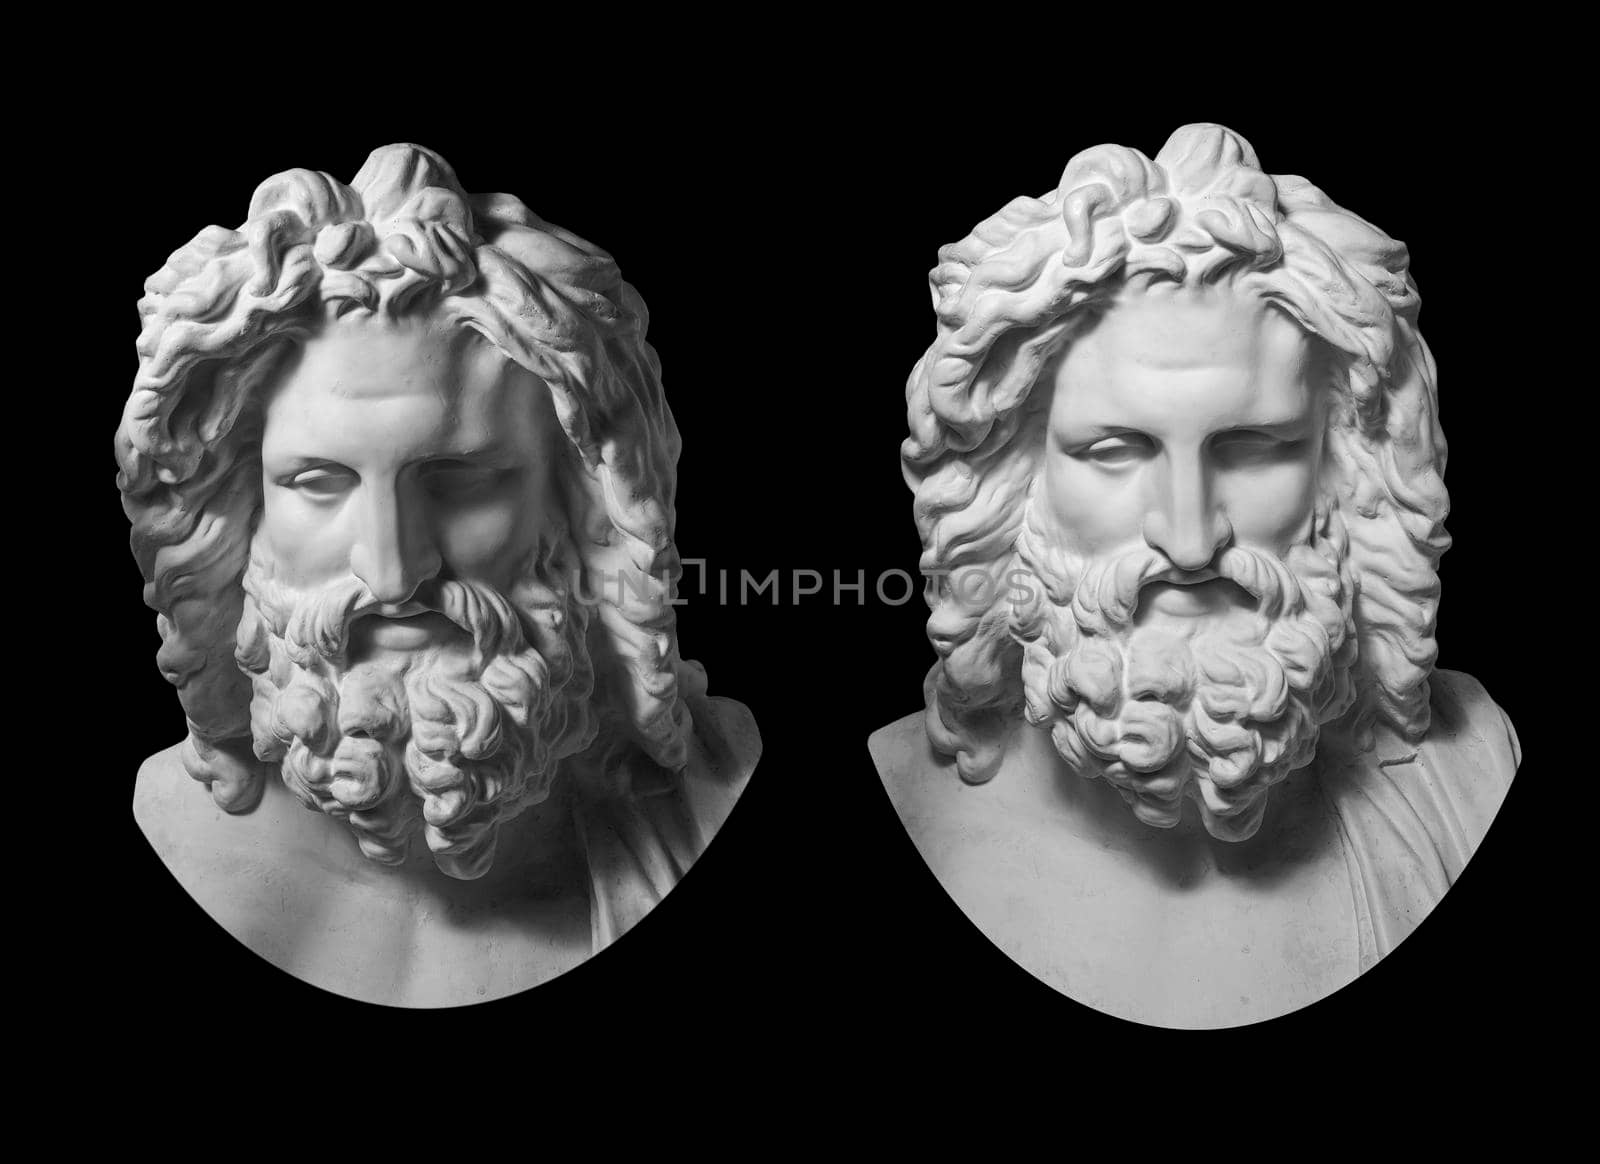 Two white gypsum copy of antique statue of Zeus head for artists isolated on a black background. Plaster sculpture of man face with beard. Zeus the ancient Greek god.